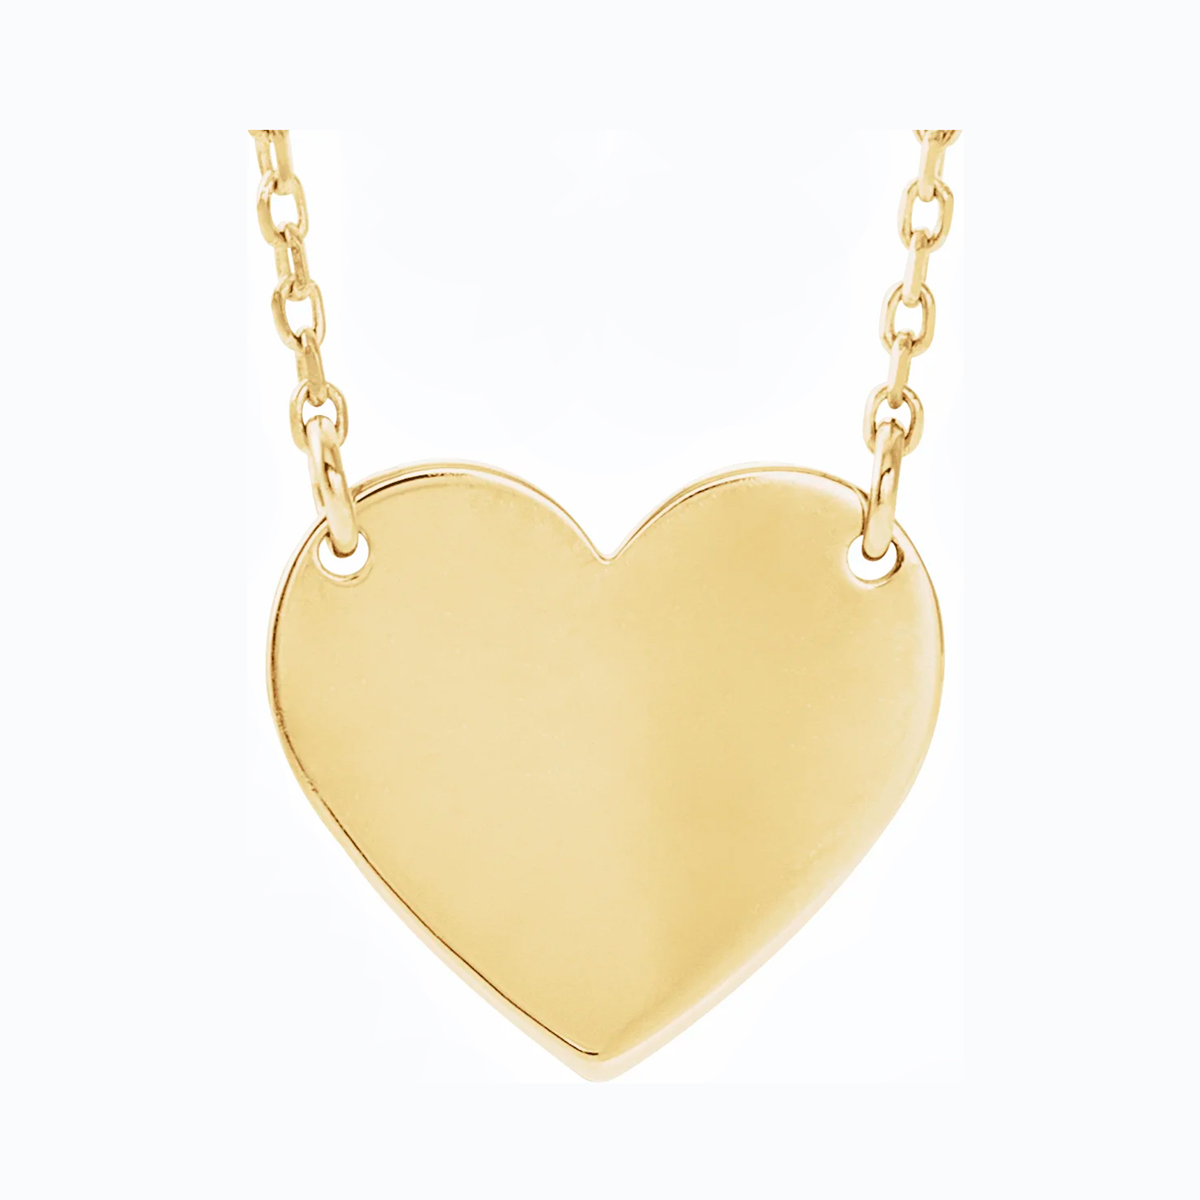 Engravable Heart Necklace, 14k Yellow Gold